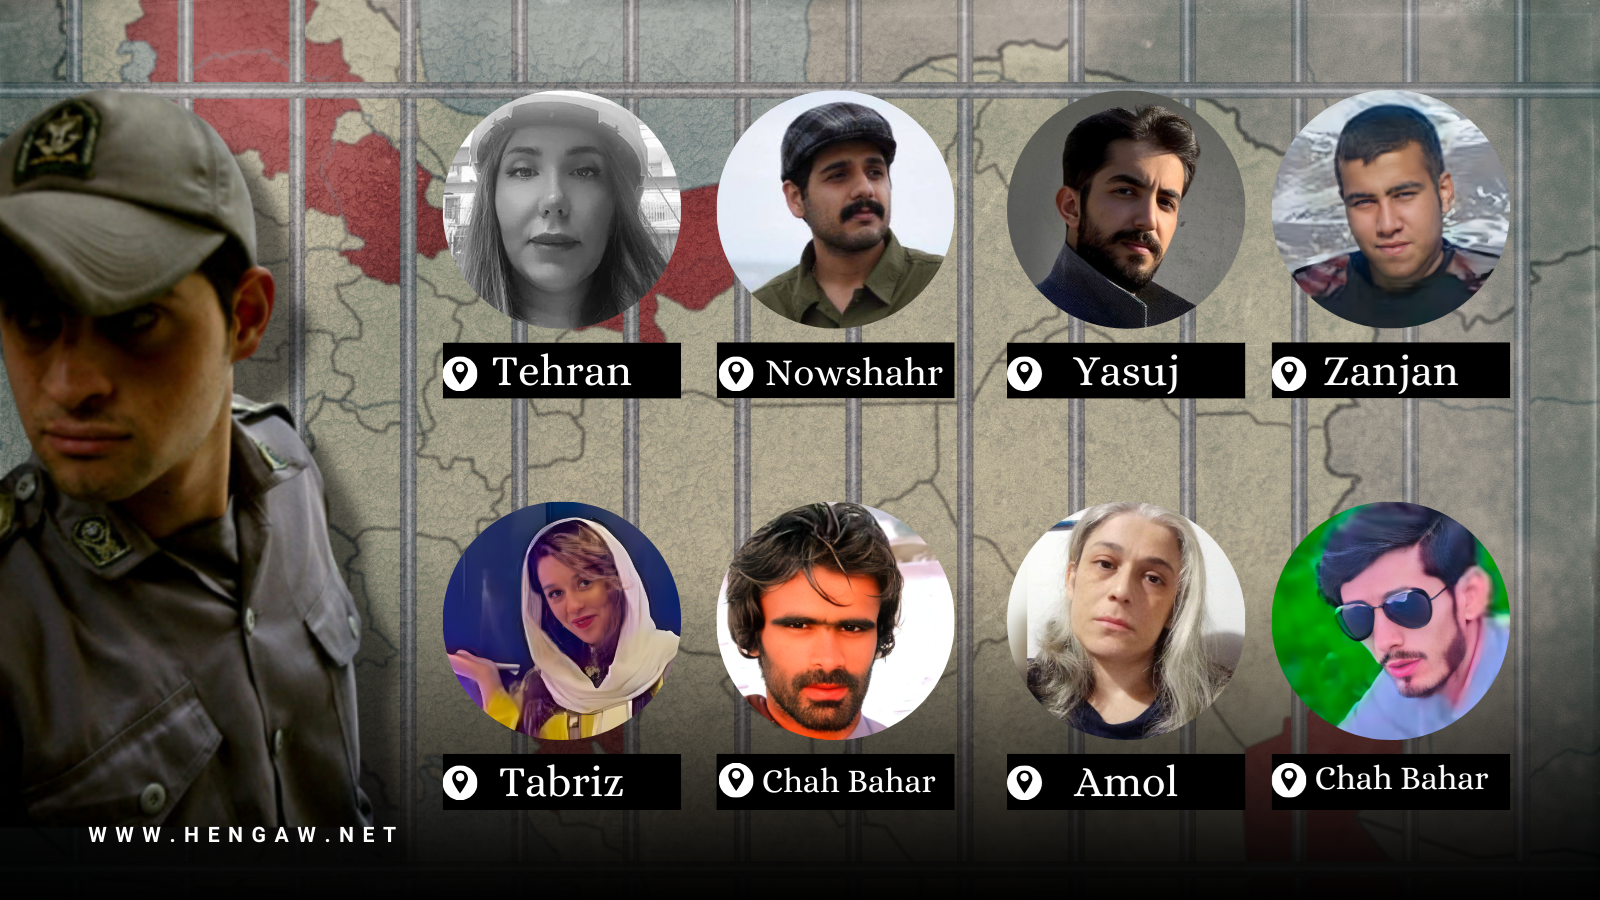 Following the persistent crackdown on activists in Iran, 8 individuals were detained this week